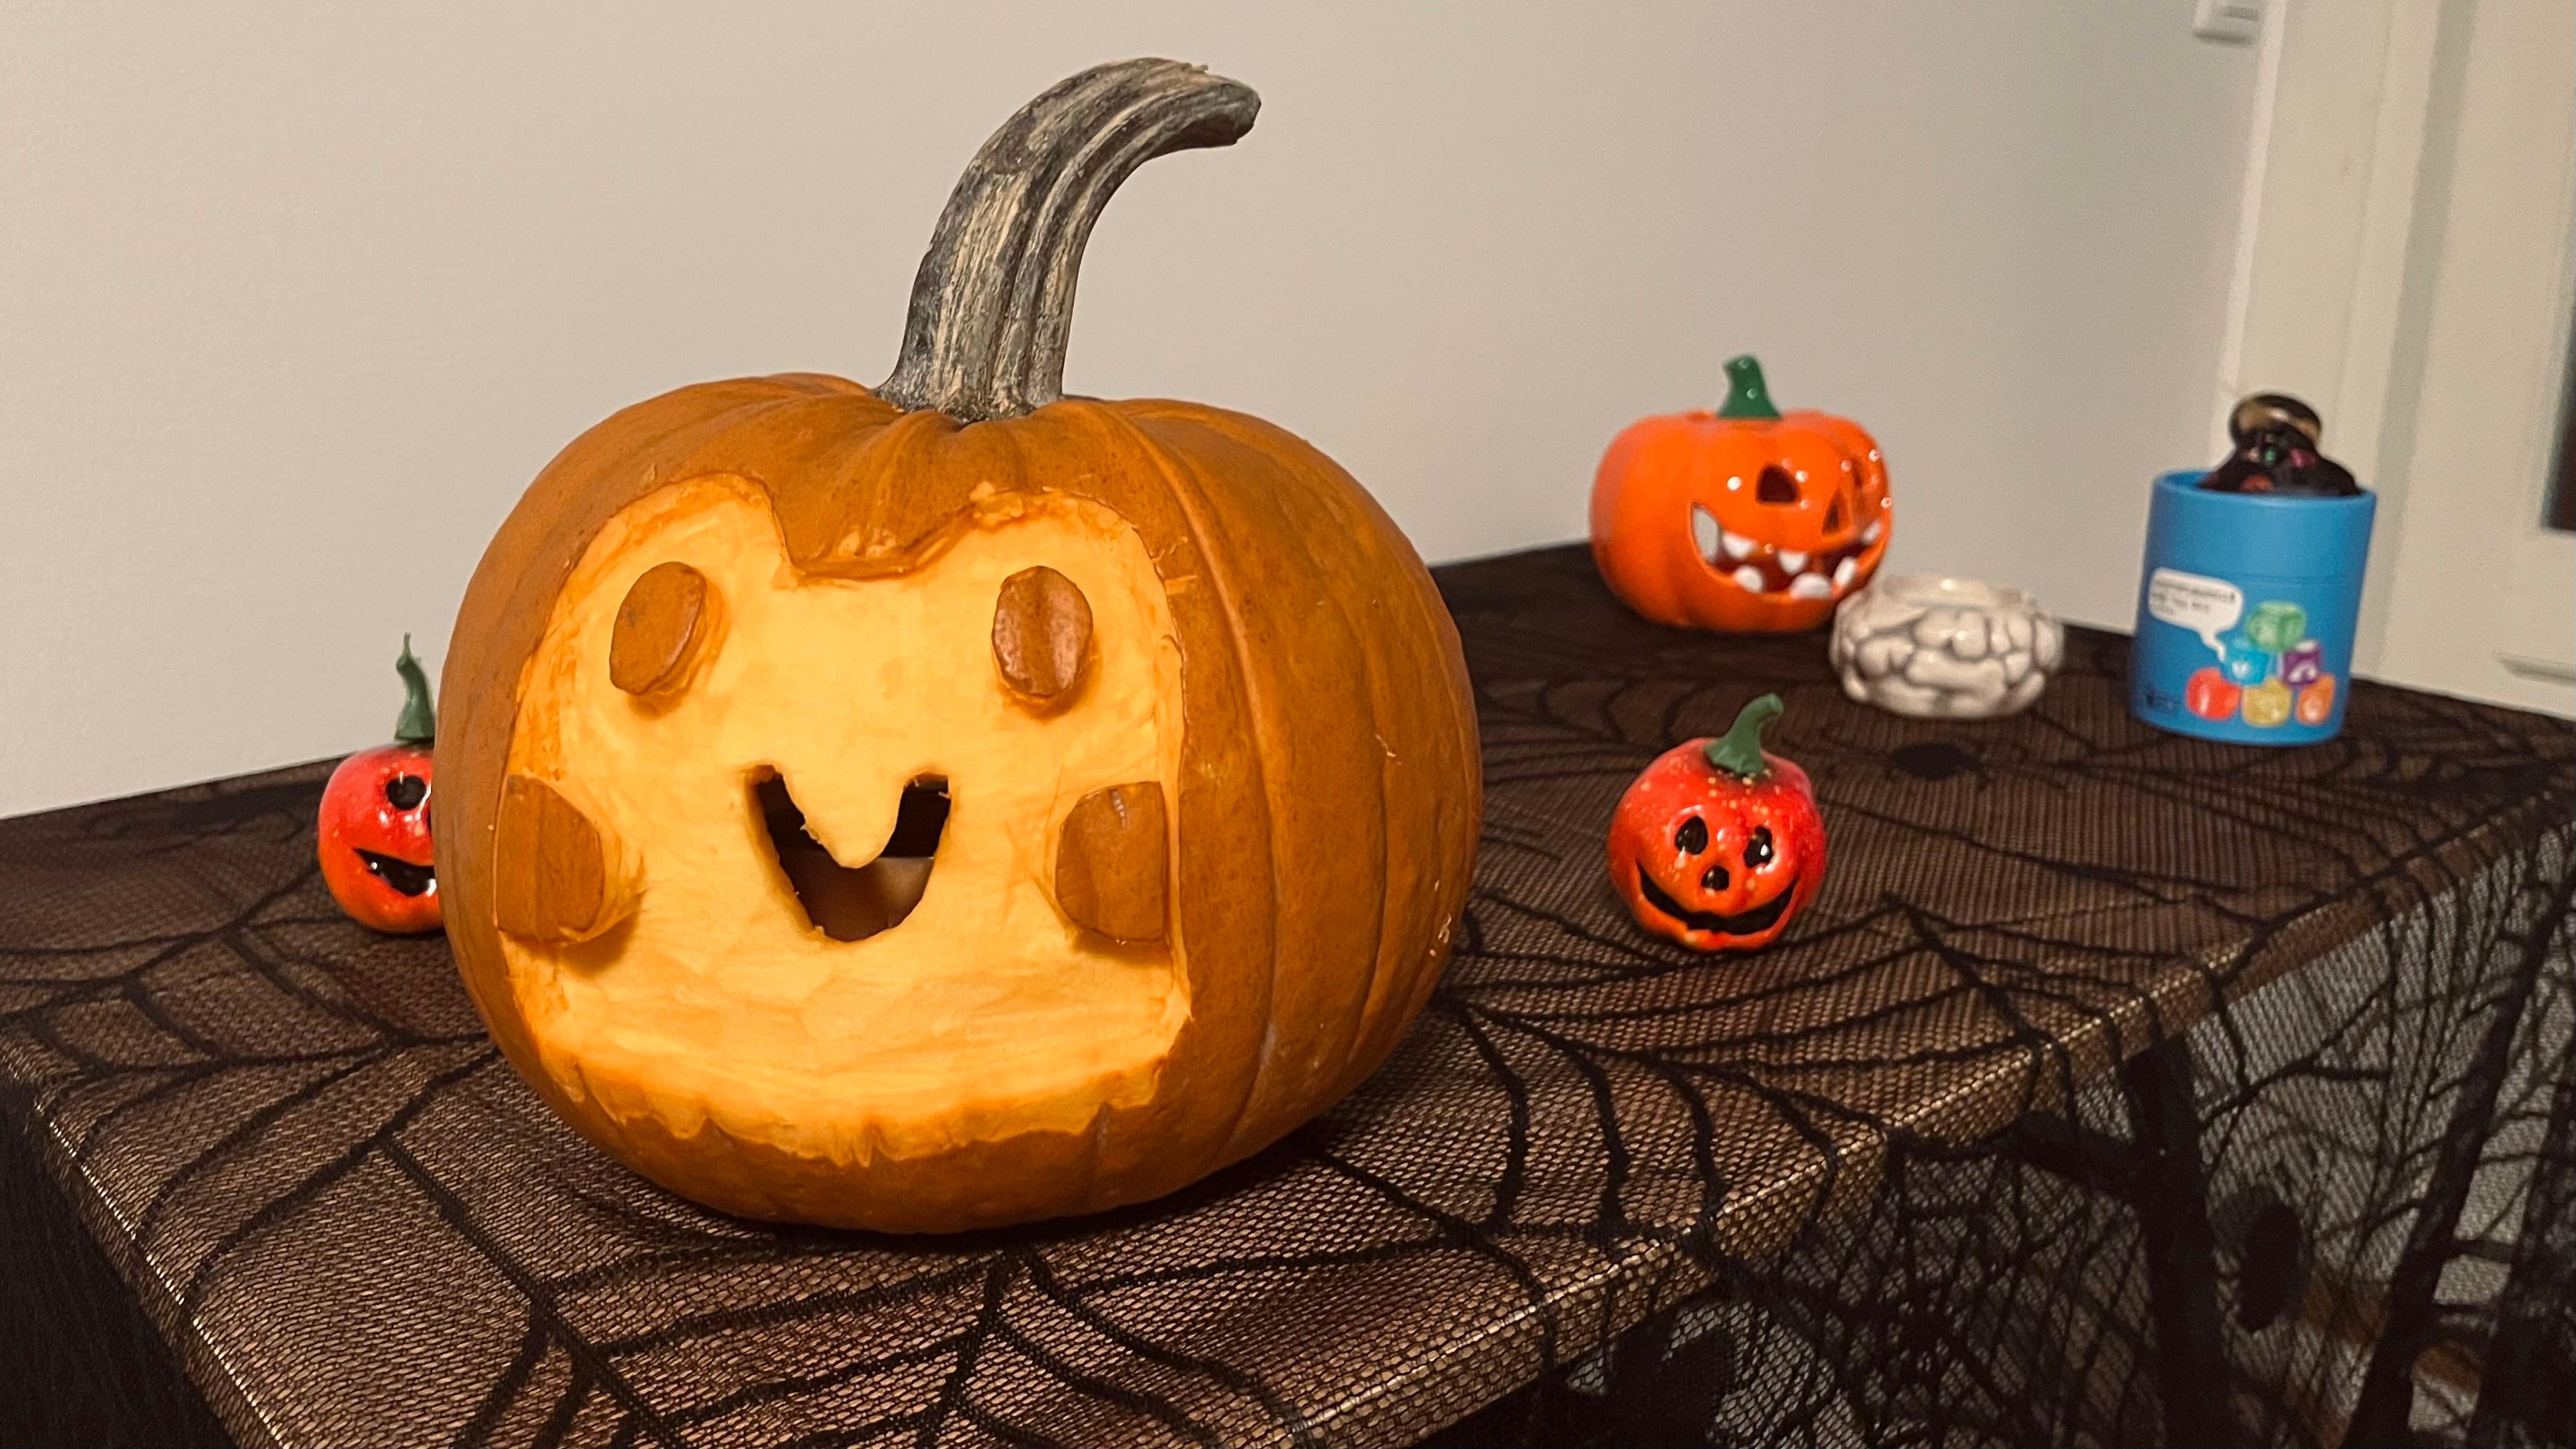 Casuology team attempts pumpkin shaving for the first time in their lives and manages to create a cute Frog-O'-Lantern.